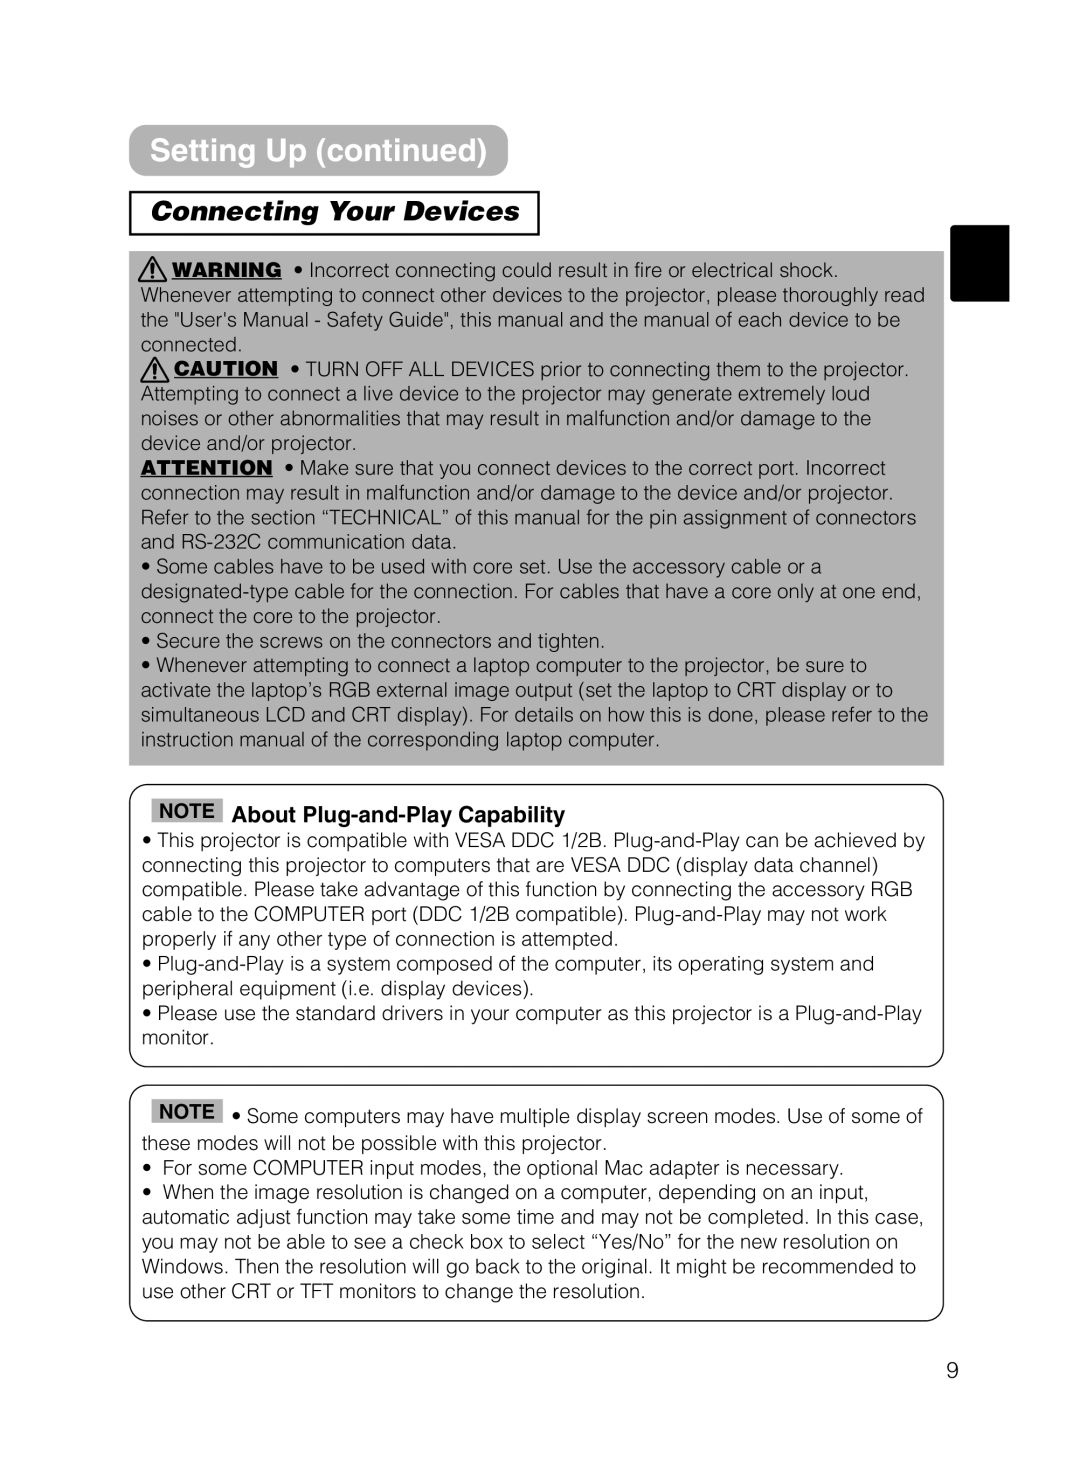 Hitachi HOME-1 user manual Connecting Your Devices, NOTE About Plug-and-Play Capability, Setting Up continued 